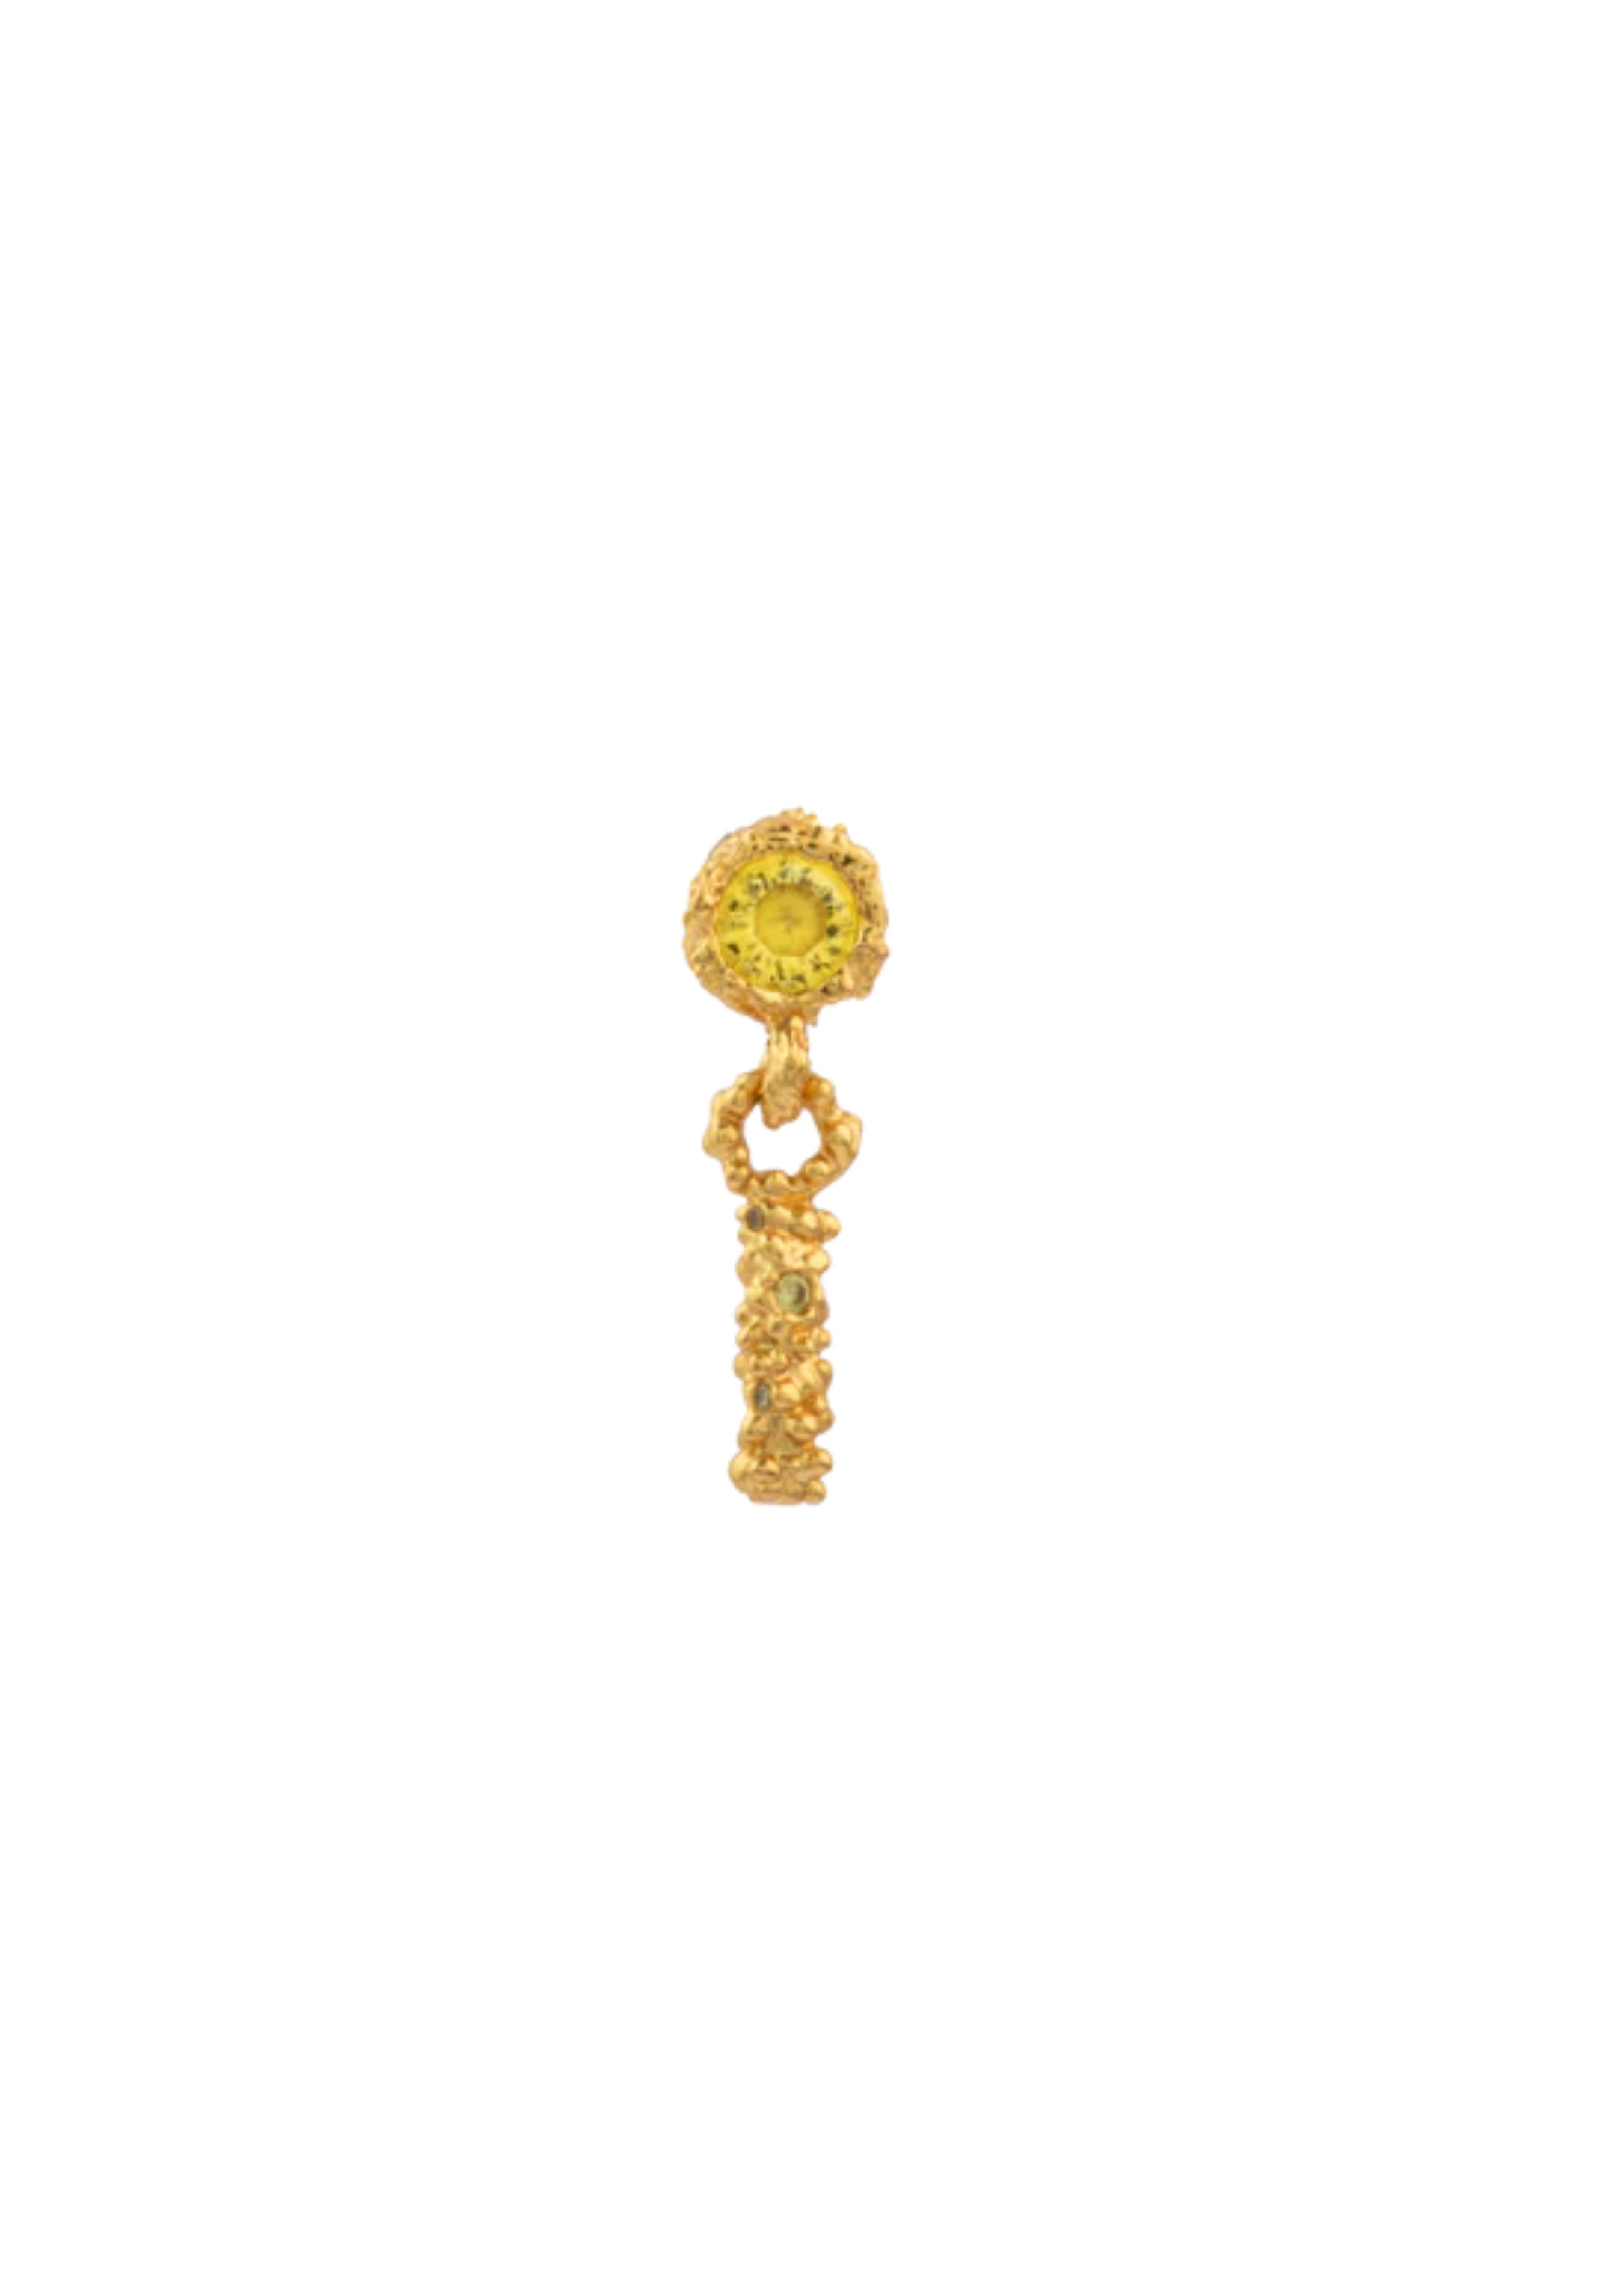 House of Vincent - Boucle d'oreille - Carnival Totem Earring - Gold